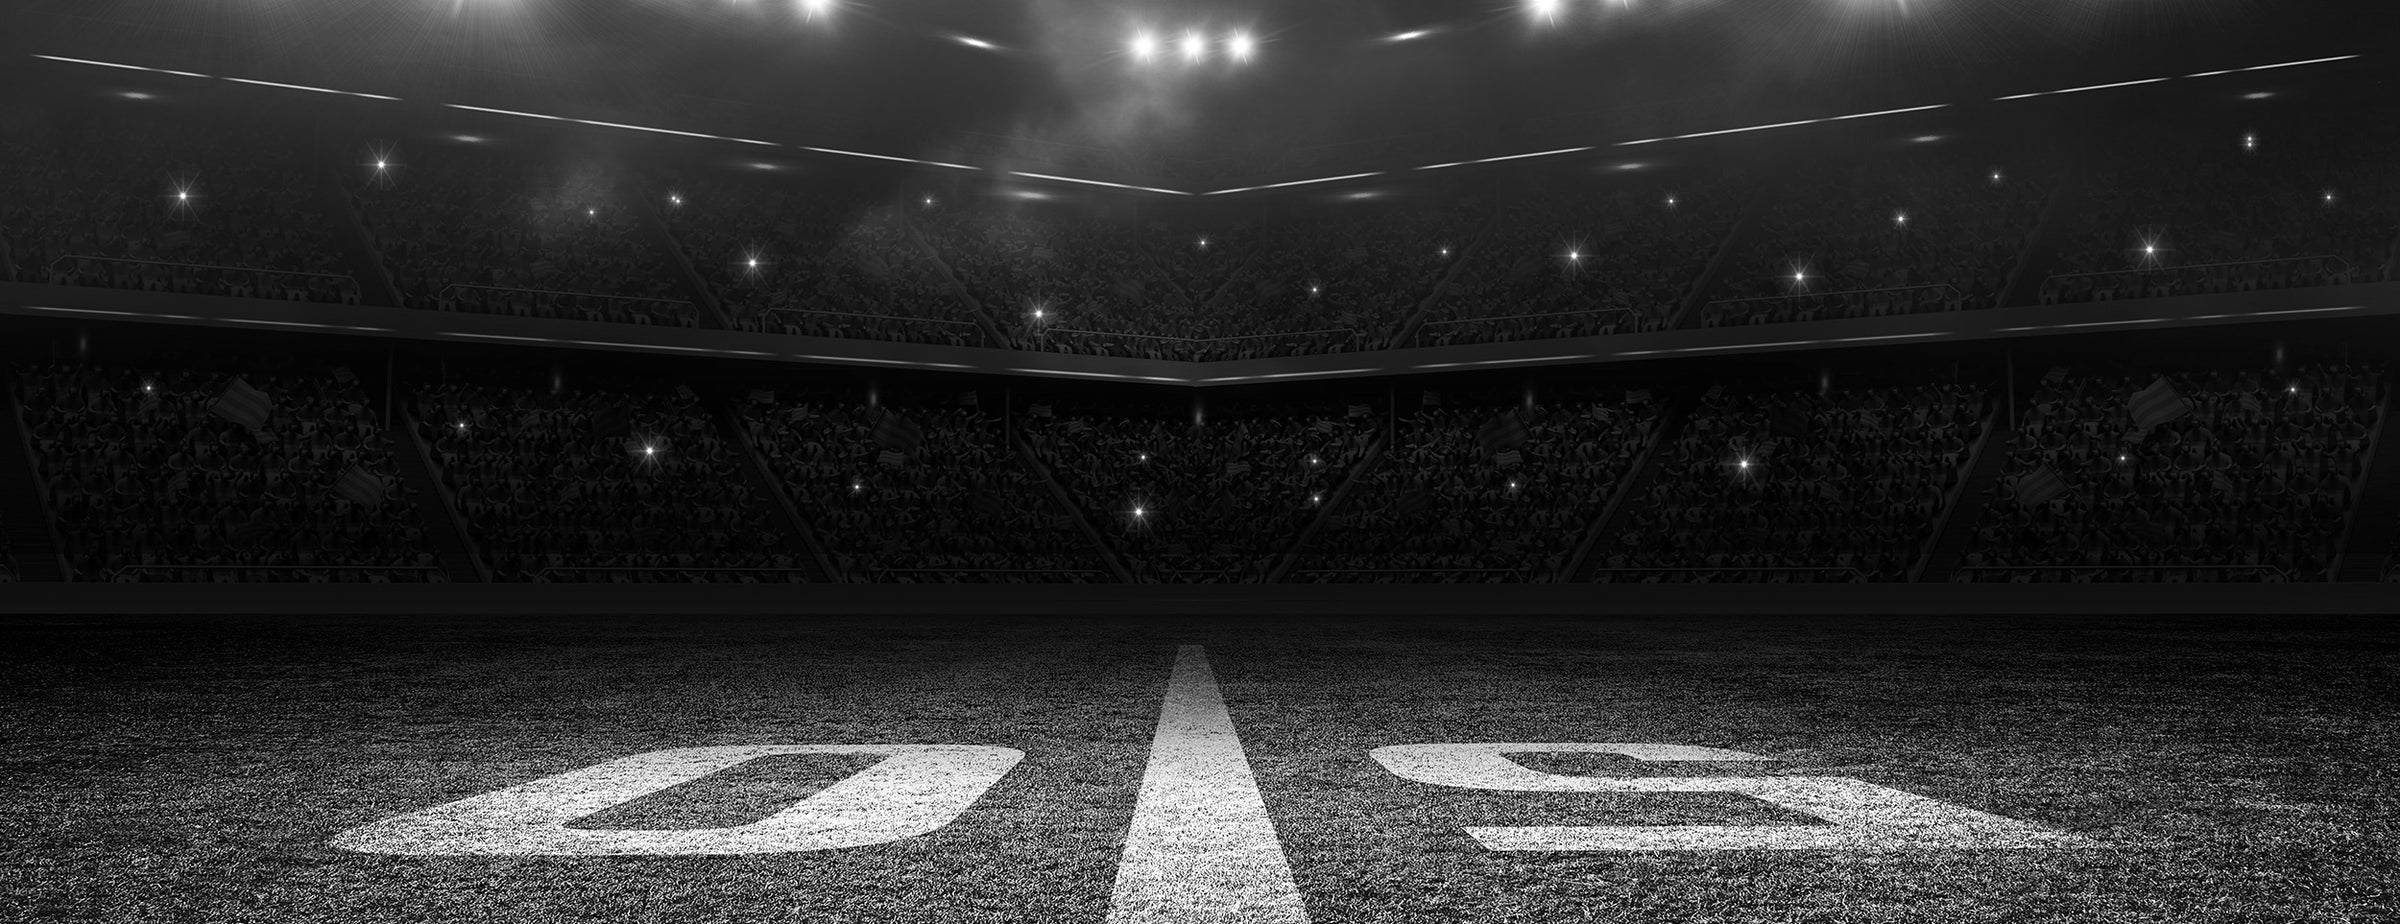 Monochrome image of a packed stadium with illuminated field lines for a sporting event.